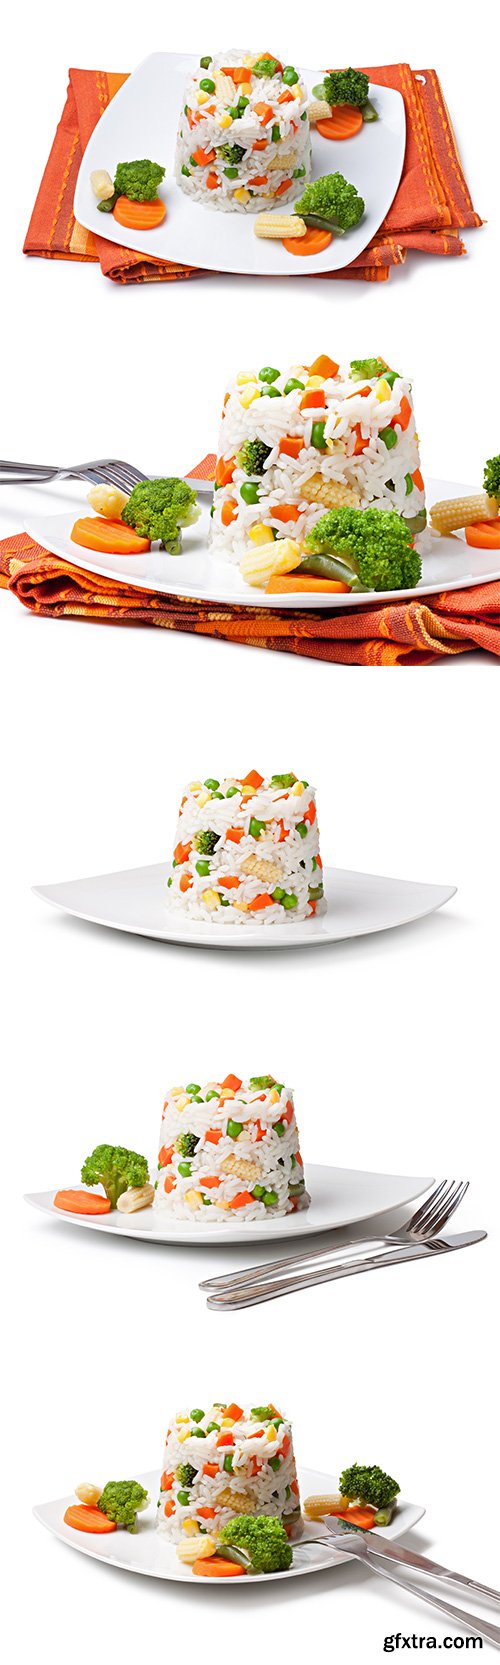 Rice And Vegetables Isolated - 5xJPGs